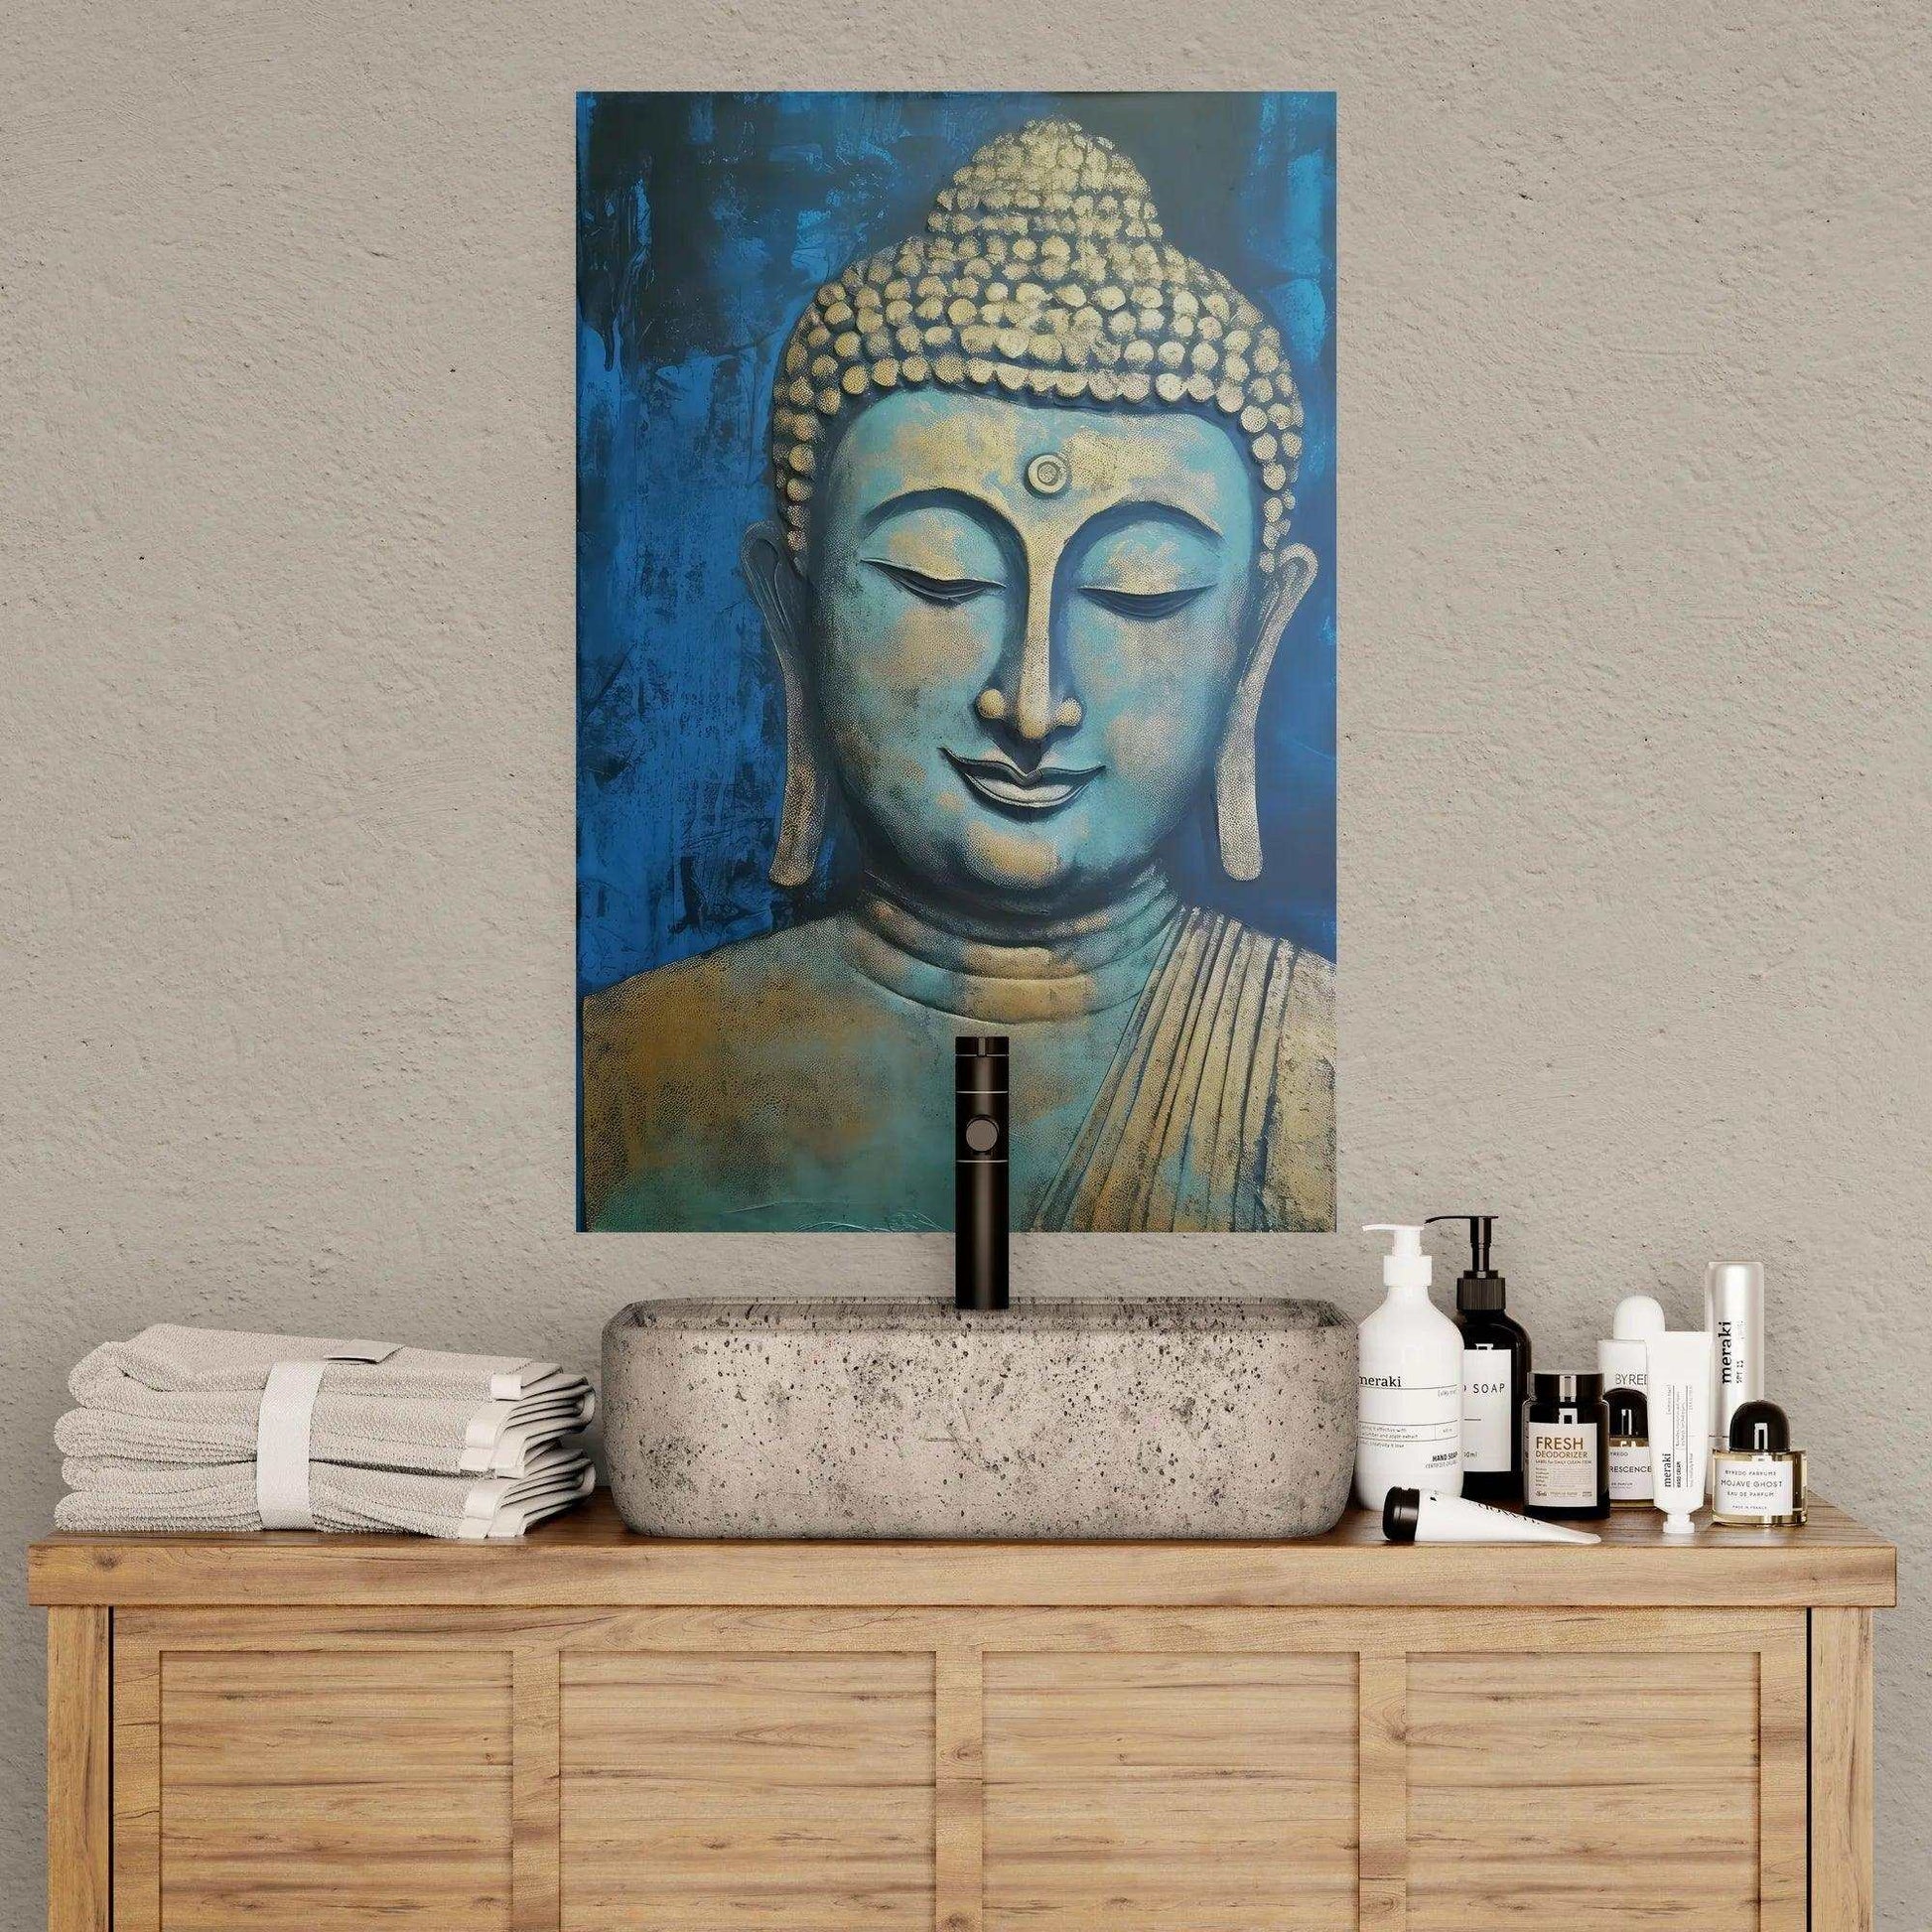 Above a wooden bathroom cabinet, a tranquil Buddha painting with blue and golden tones adds a Zen-like atmosphere, paired with a modern stone basin and neatly folded towels, creating a spa-inspired environment.